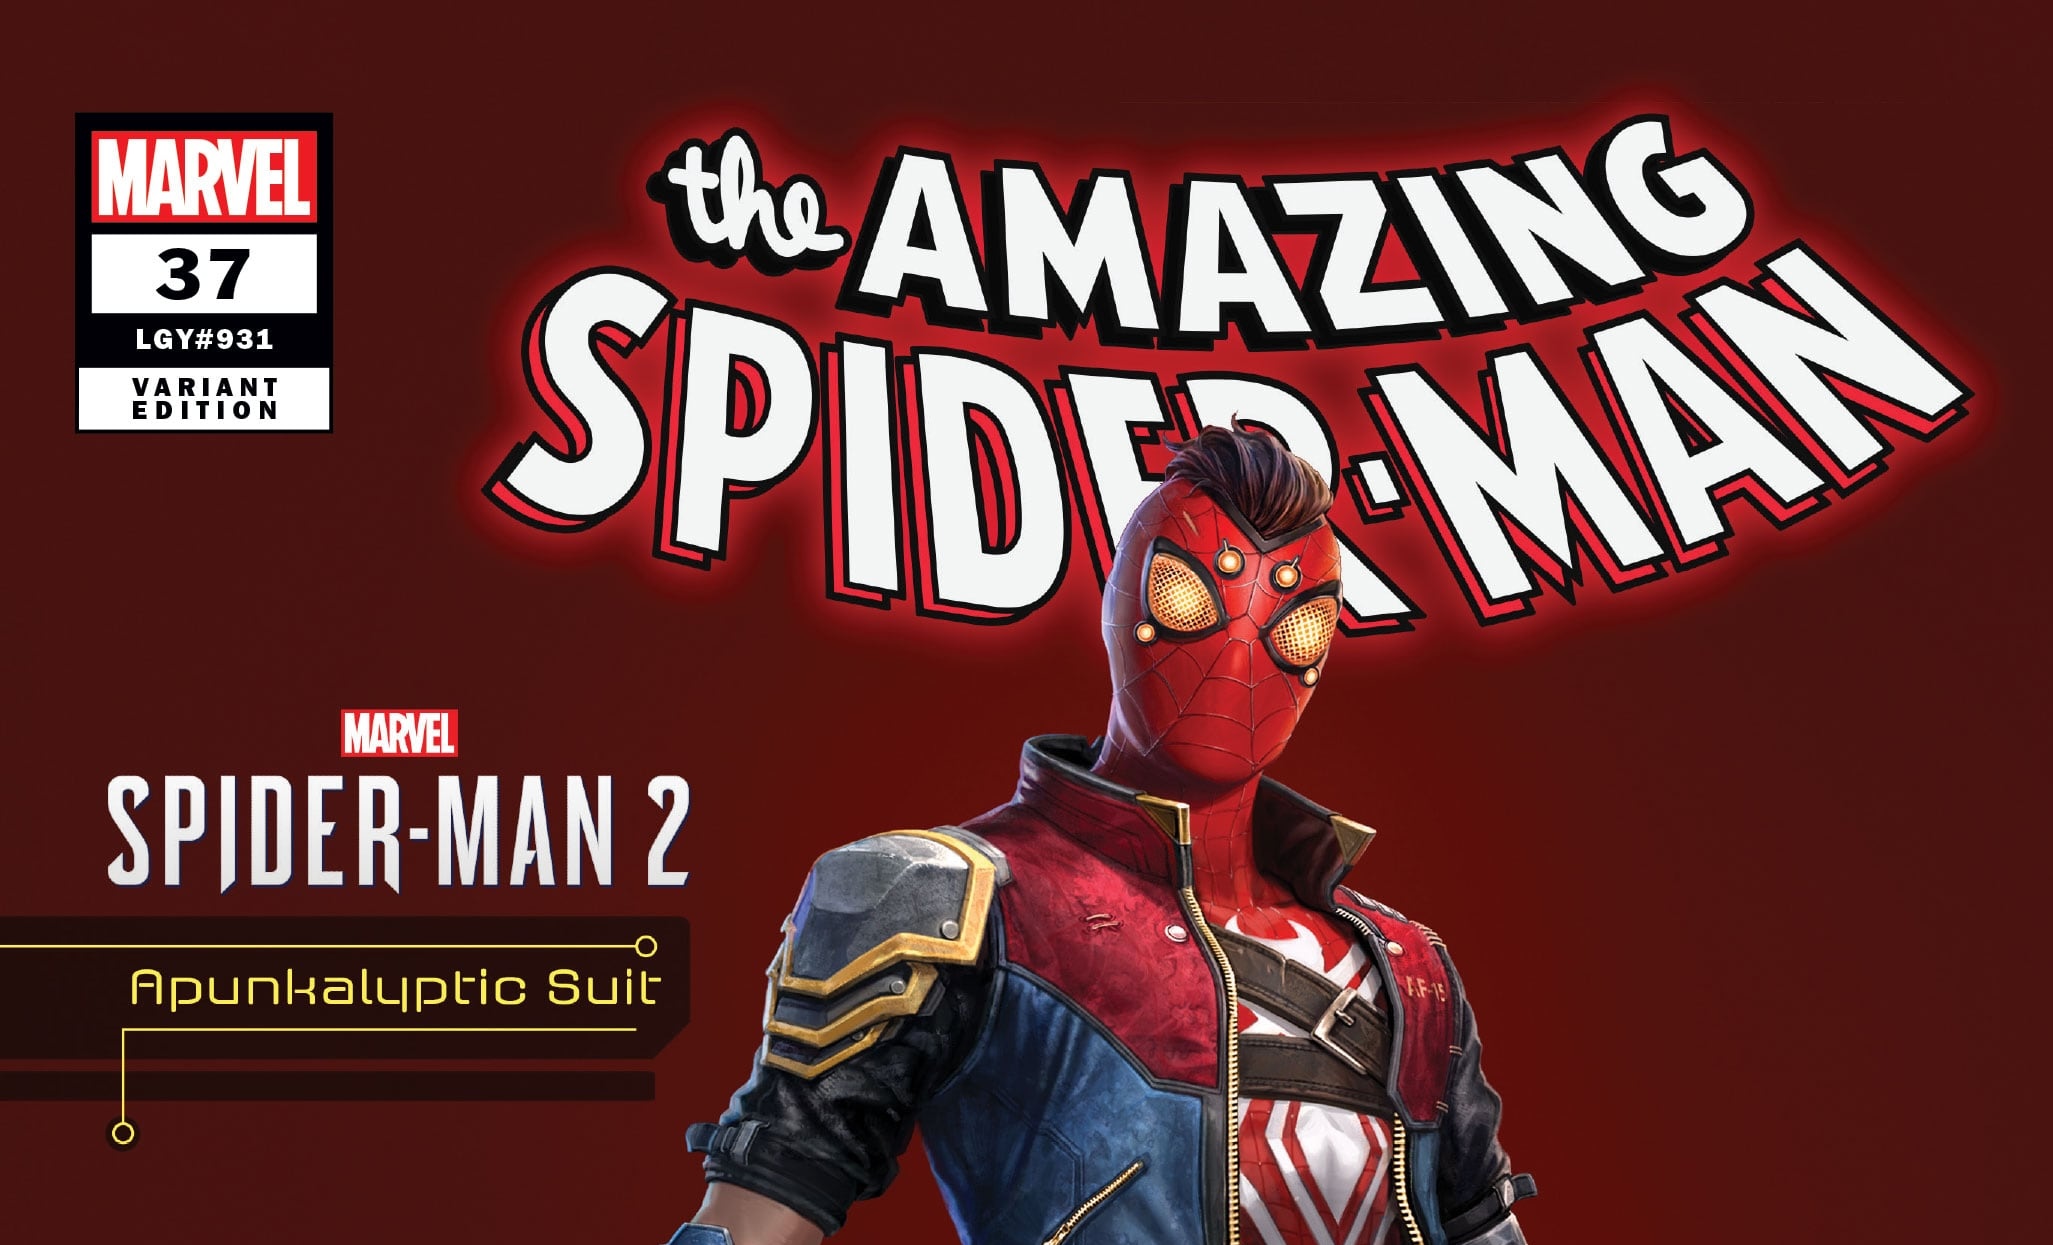 New suits debuting in Marvel's Spider-Man 2 video game showcased in new variant covers